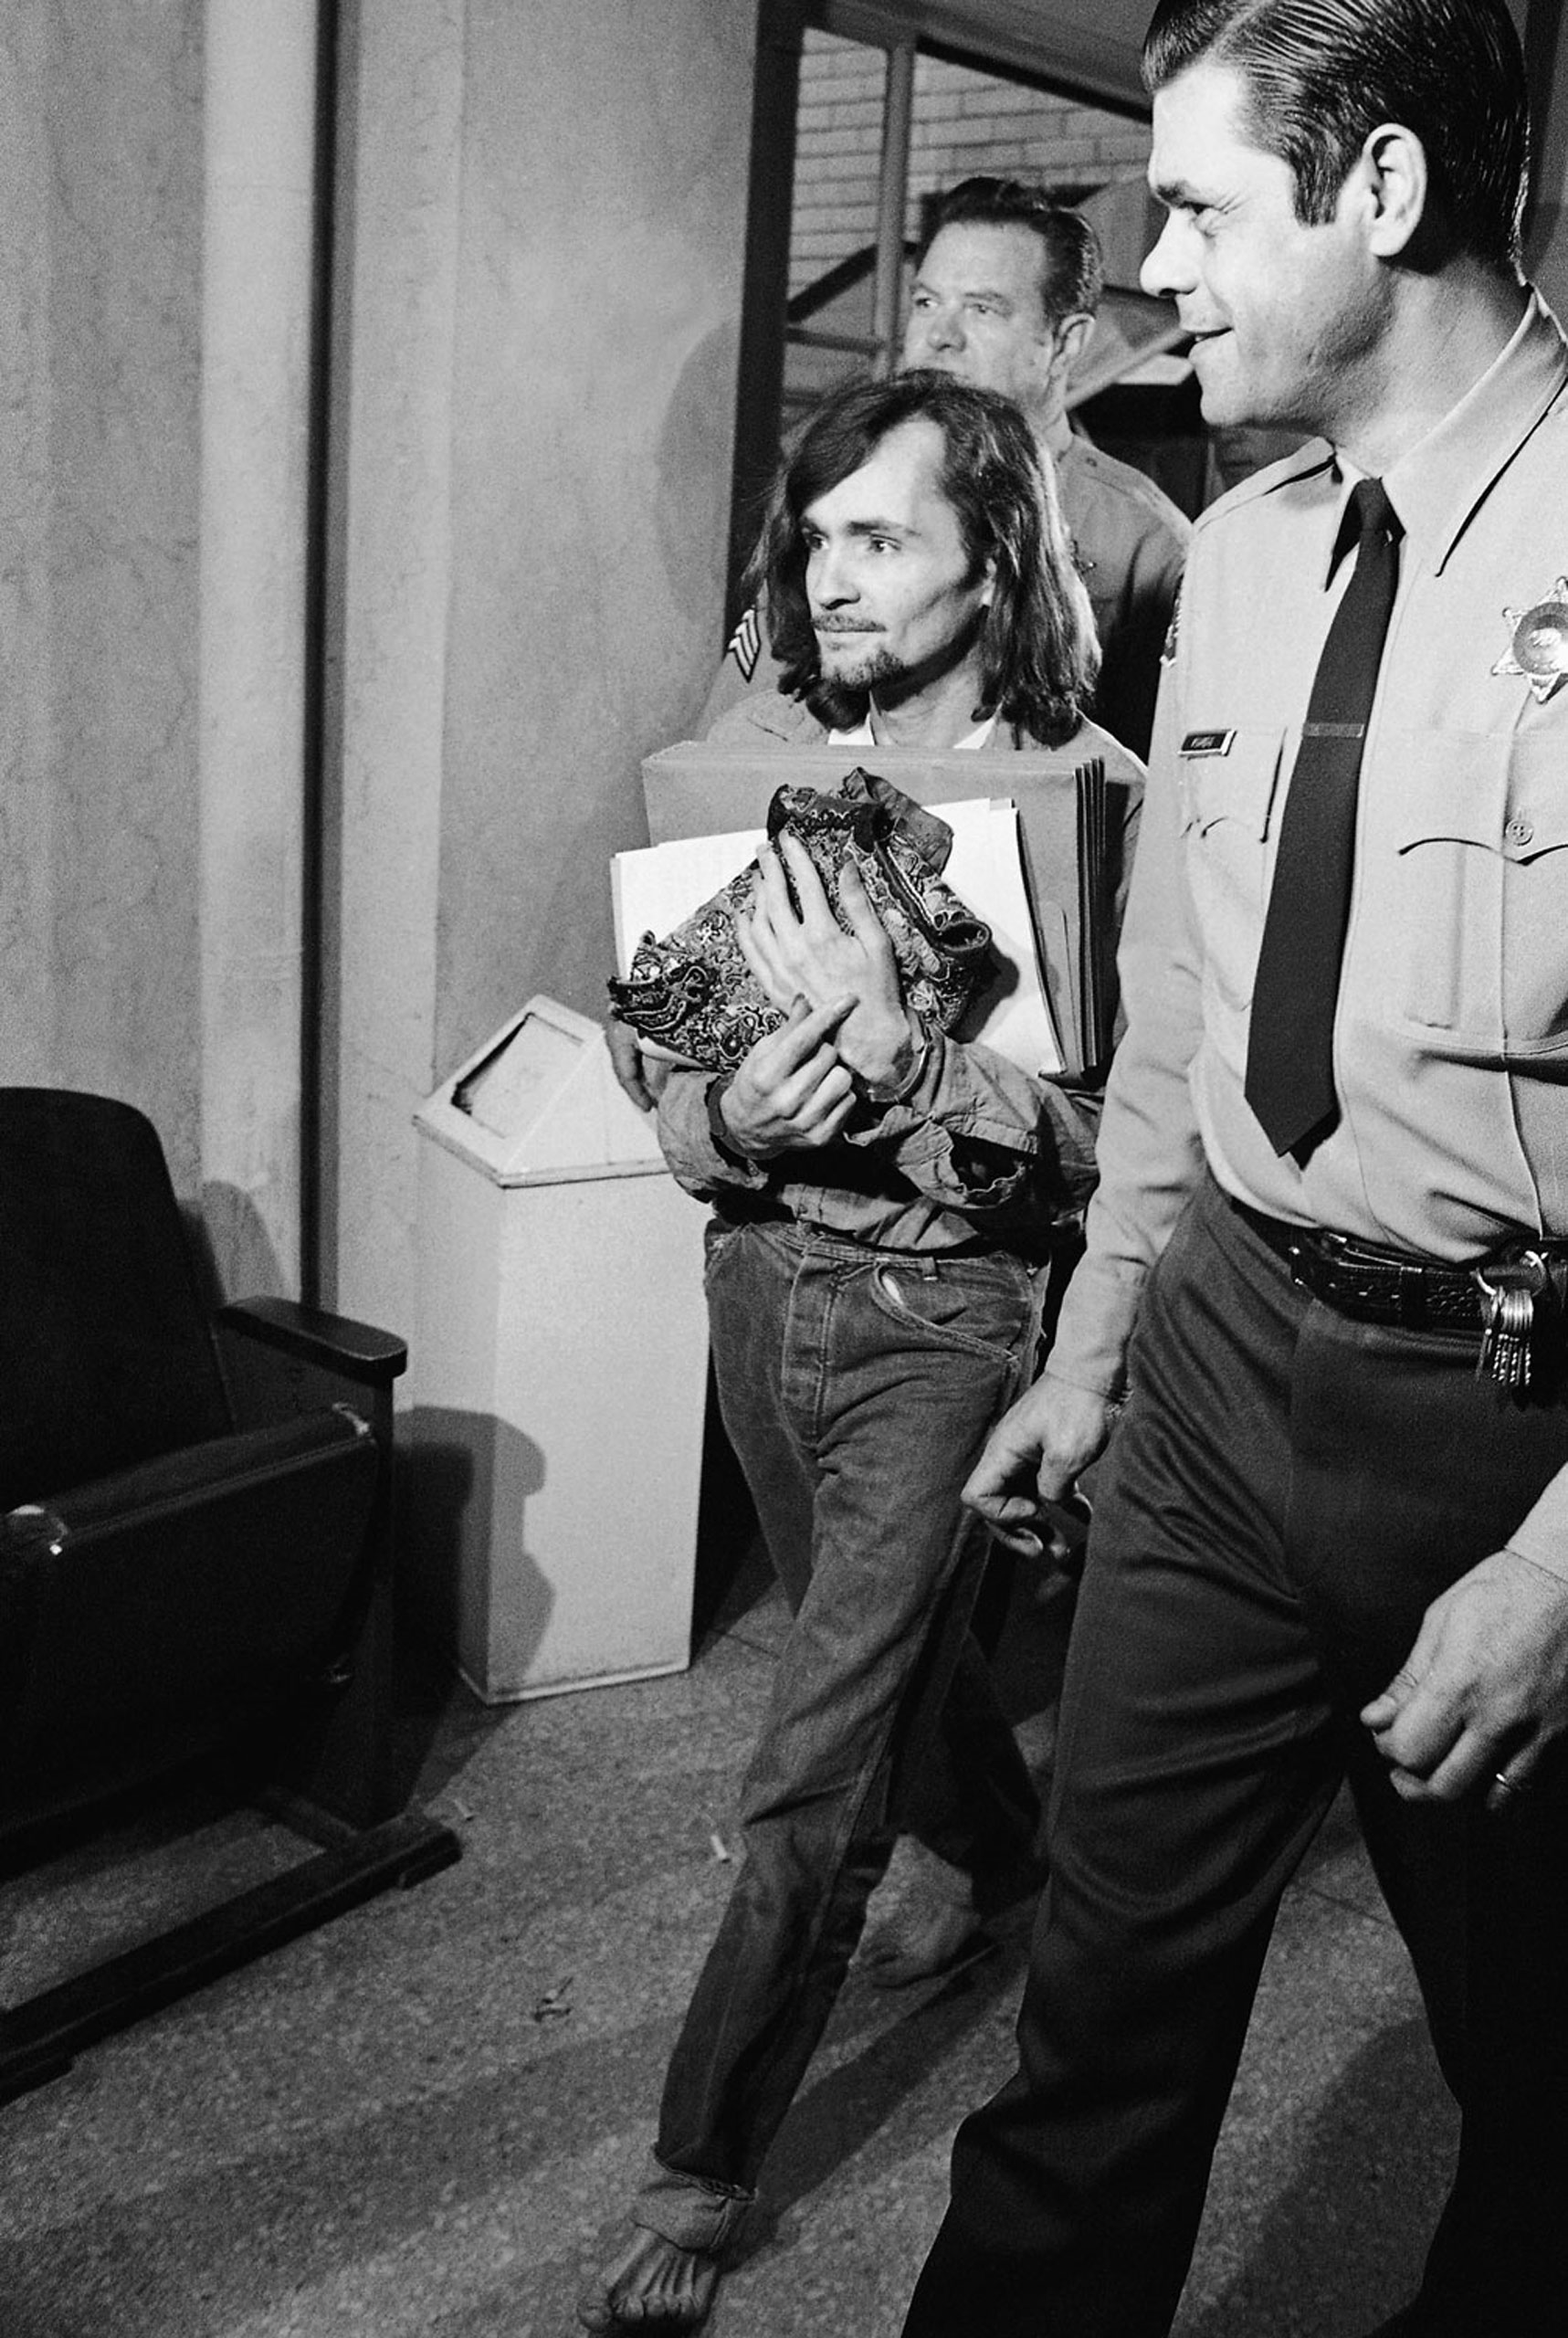 Charles Manson, accused of seven killings including that of actress Sharon Tate, leaves a Los Angeles courtroom, on Feb. 16, 1970 where he was denied a change of venue.